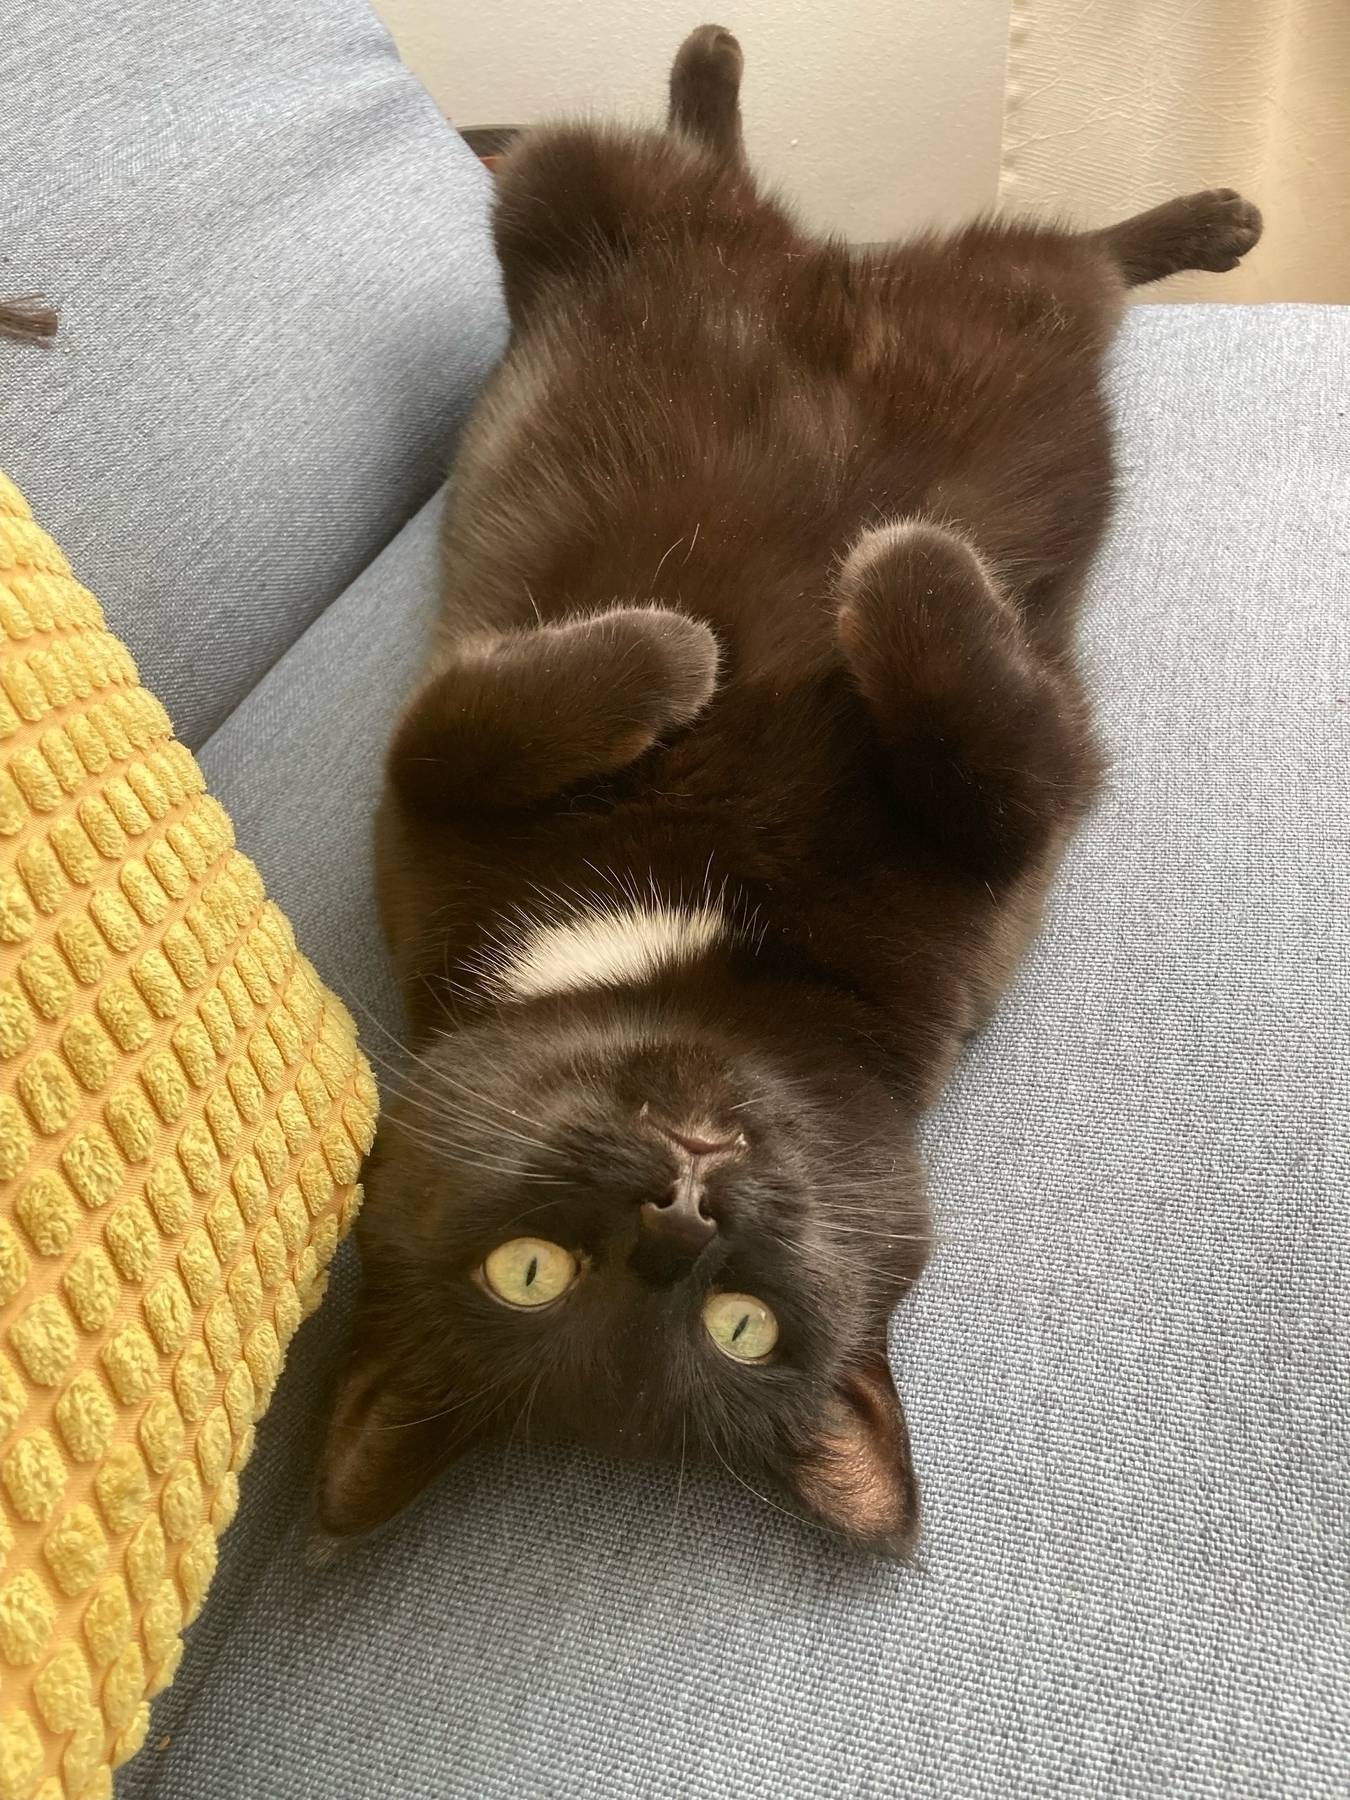 Kolka, lying upside down on a sofa, looking up at the photographer (my sister)